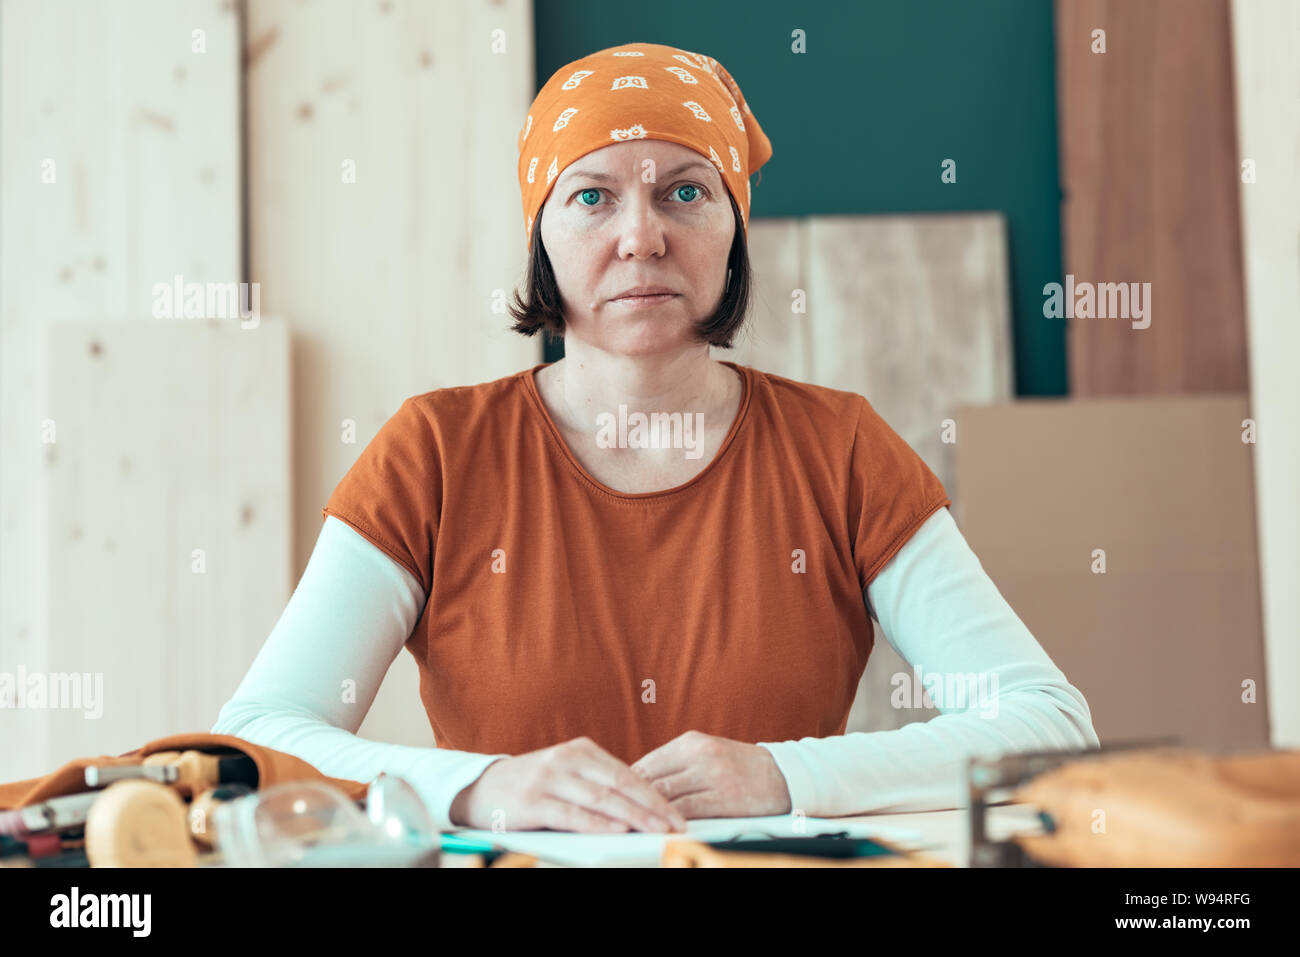 Portrait of confident female carpenter wearing headscarf bandana in small business woodwork workshop Stock Photo